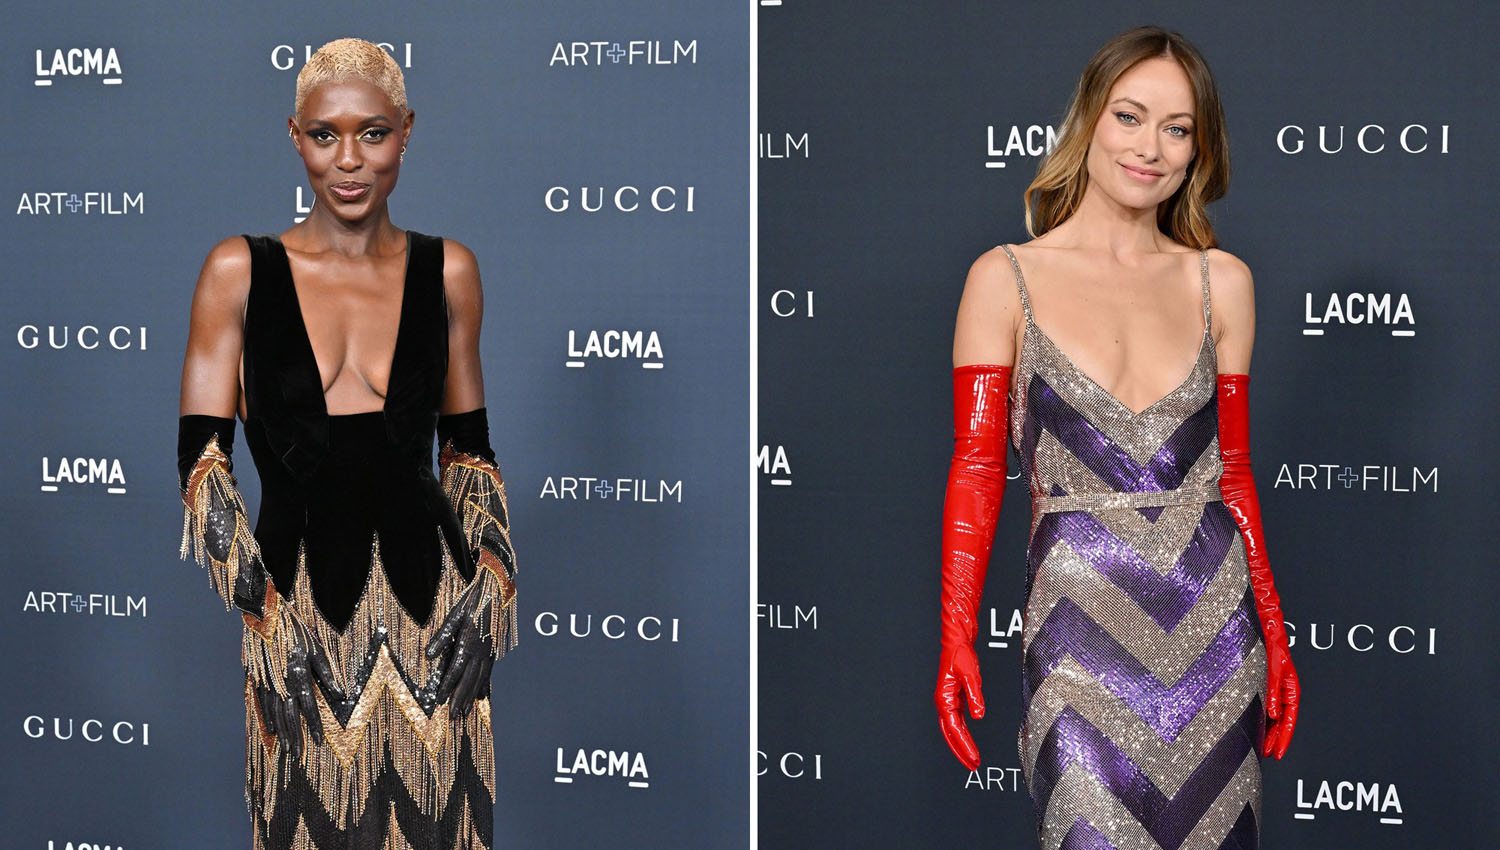 Jodie TurnerSmith and Olivia Wilde attend LACMA Art and Film gala in